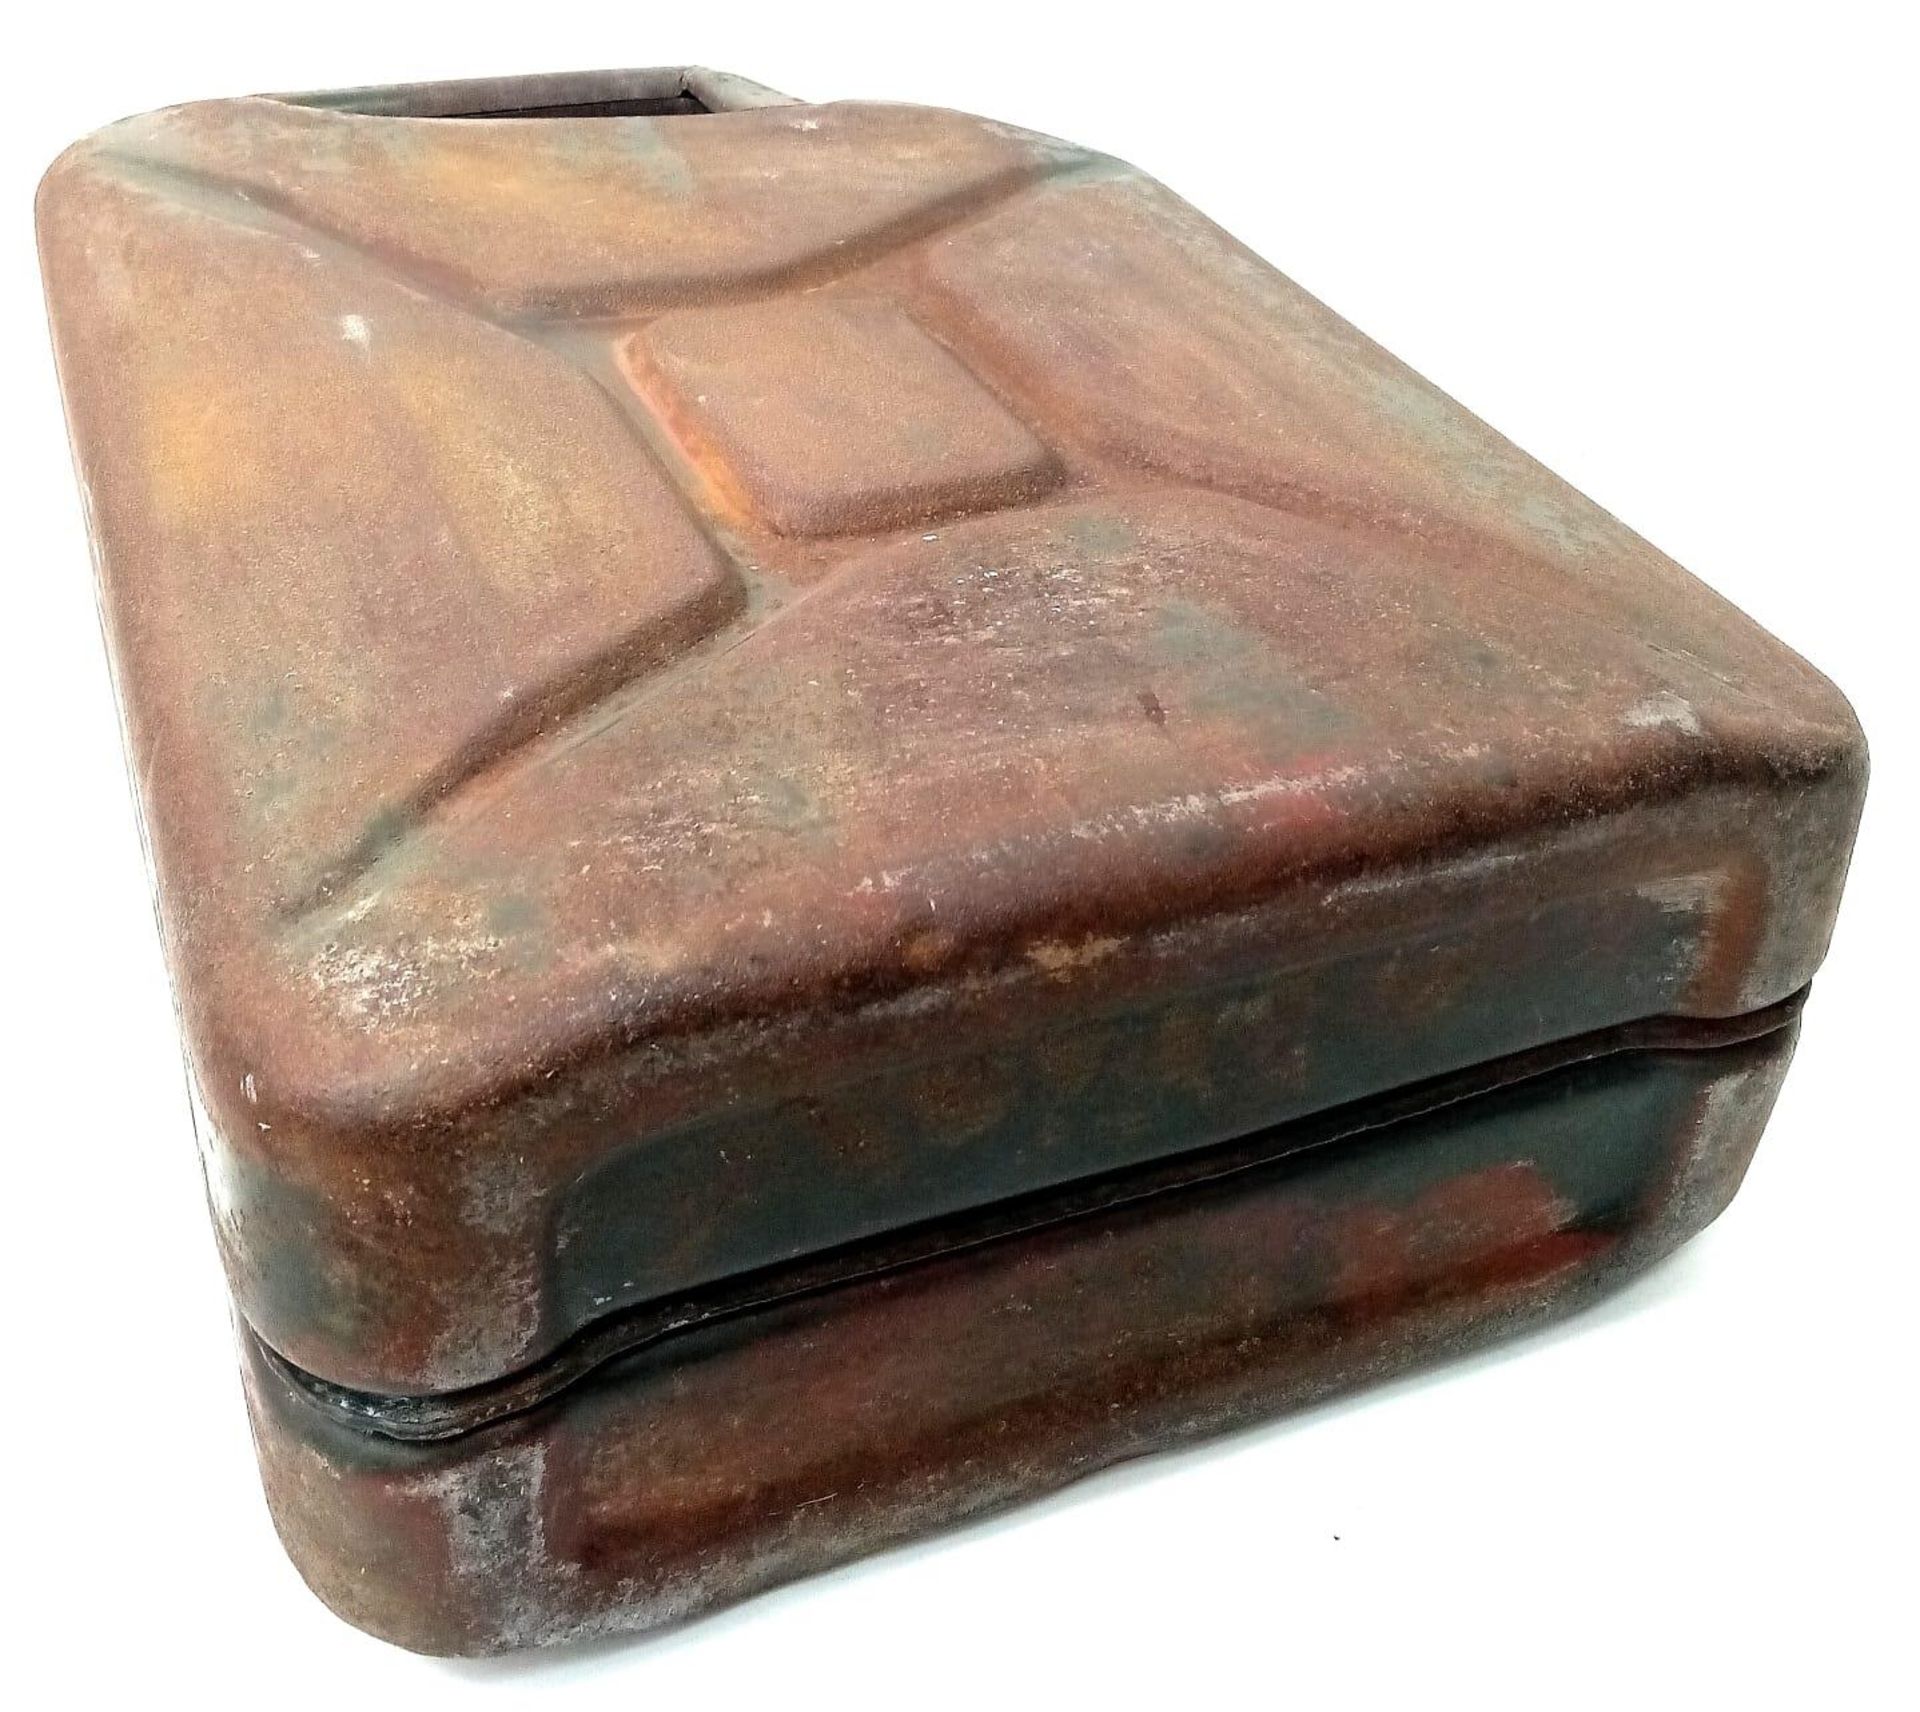 100% Genuine Waffen SS 20 Ltr. Jerry Can Made by Sandrik. This can was found in Normandy France. - Image 5 of 6